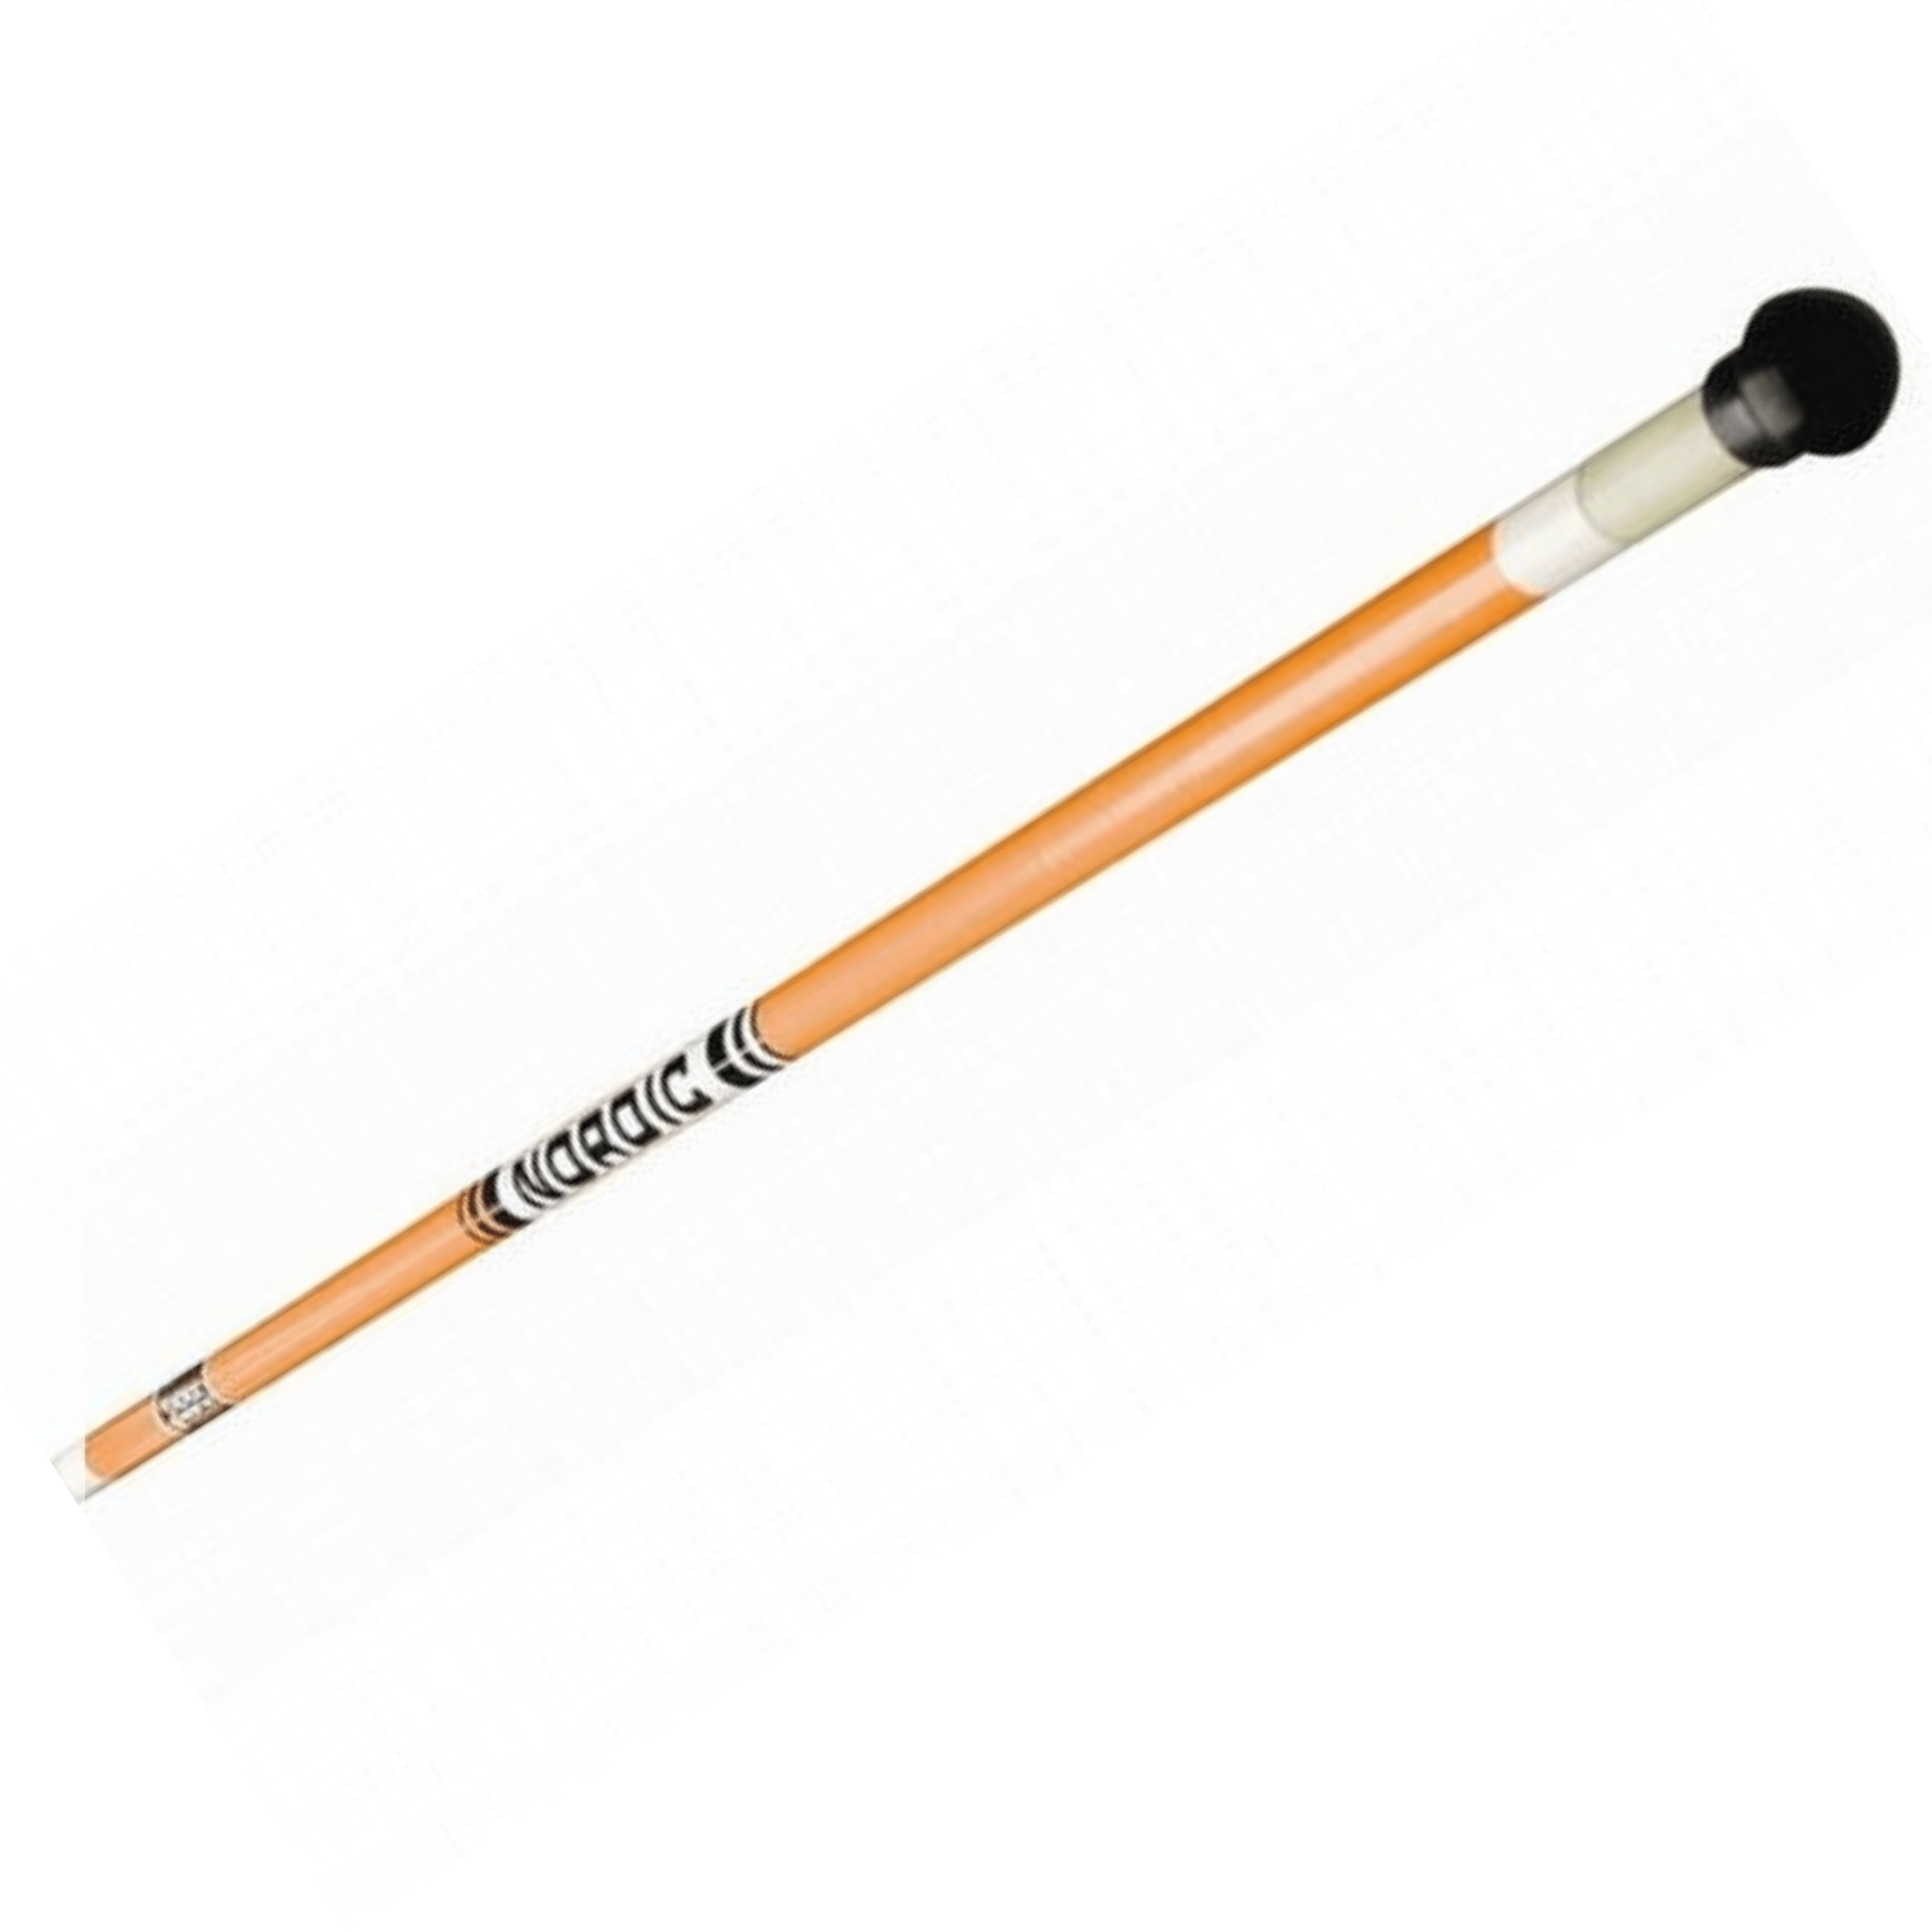 Nordic Vaulting Pole | Orange with white tip, black bung and Nordic label